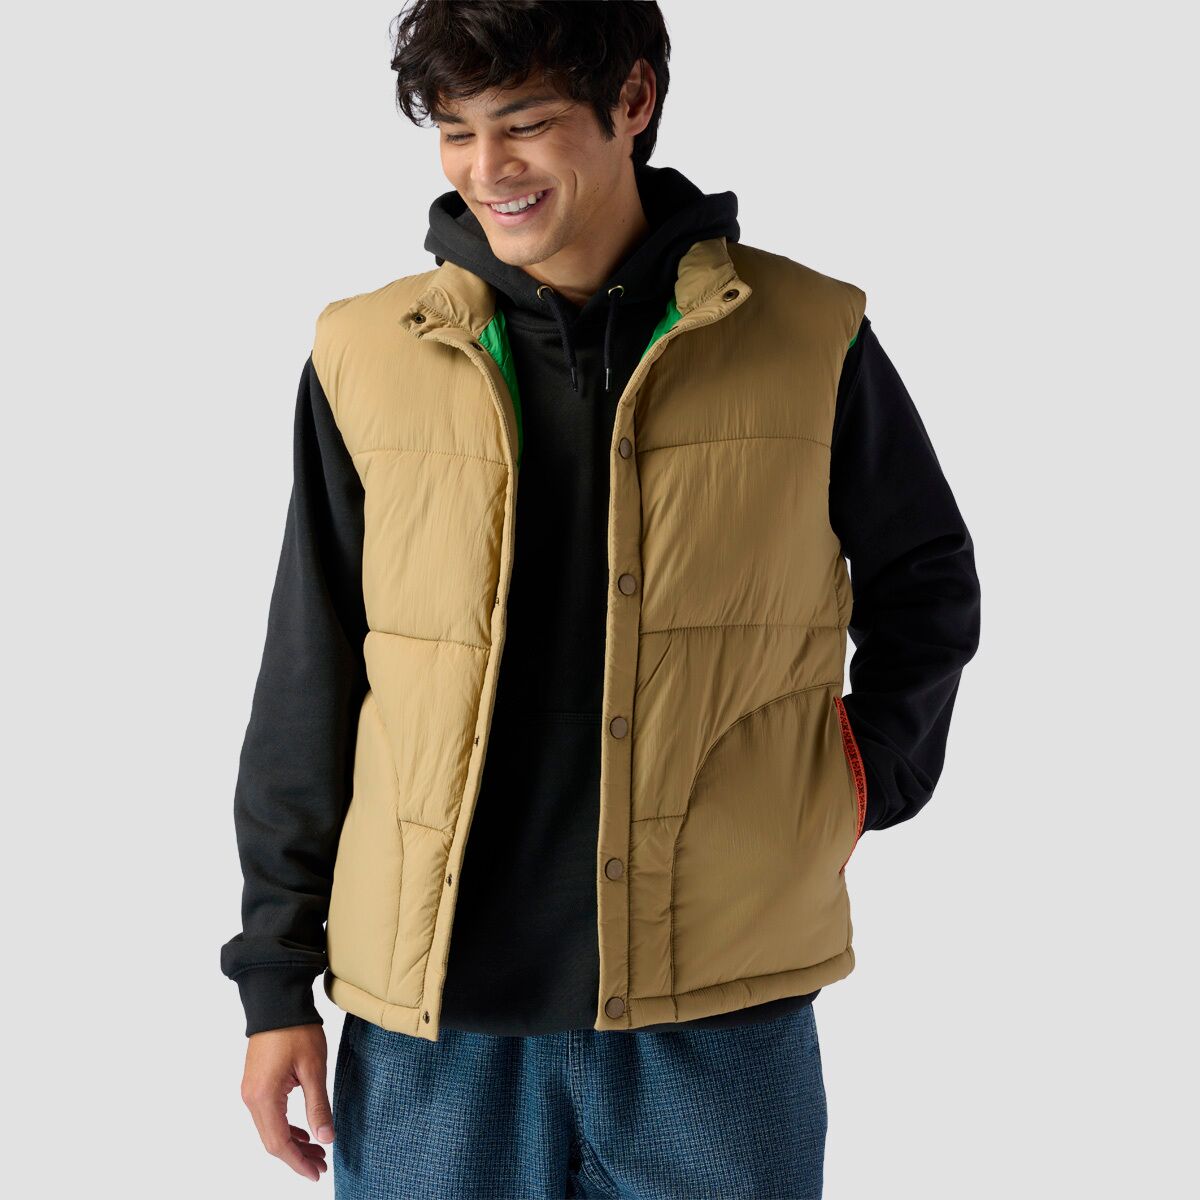 Stoic Synthetic Insulated Vest - Men's